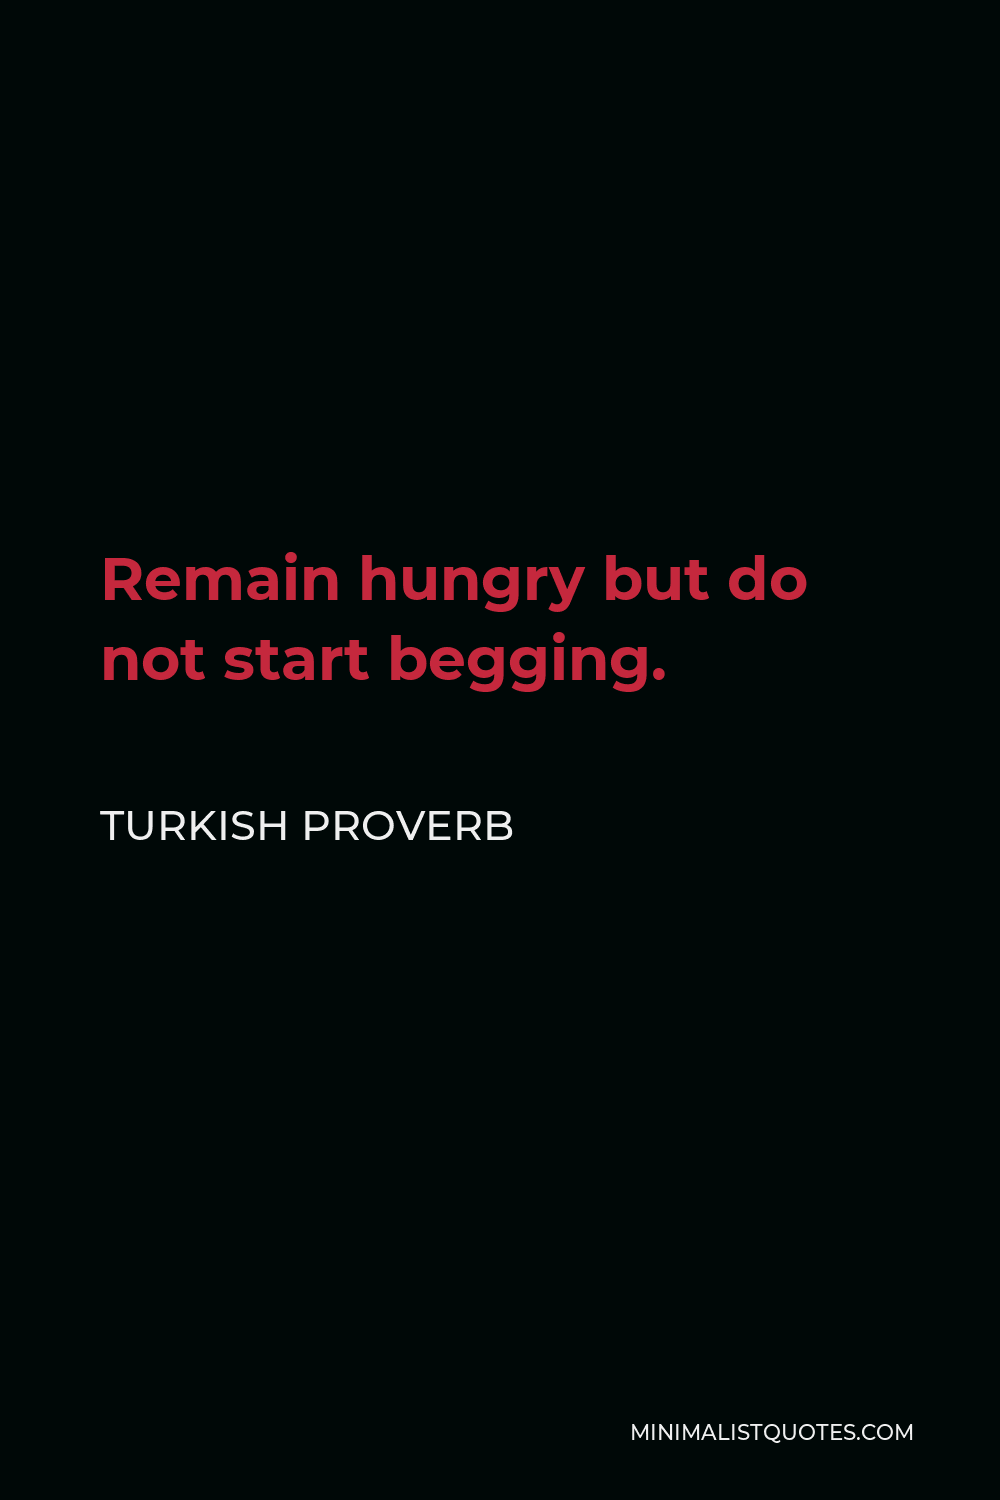 Turkish Proverb Quote - Remain hungry but do not start begging.